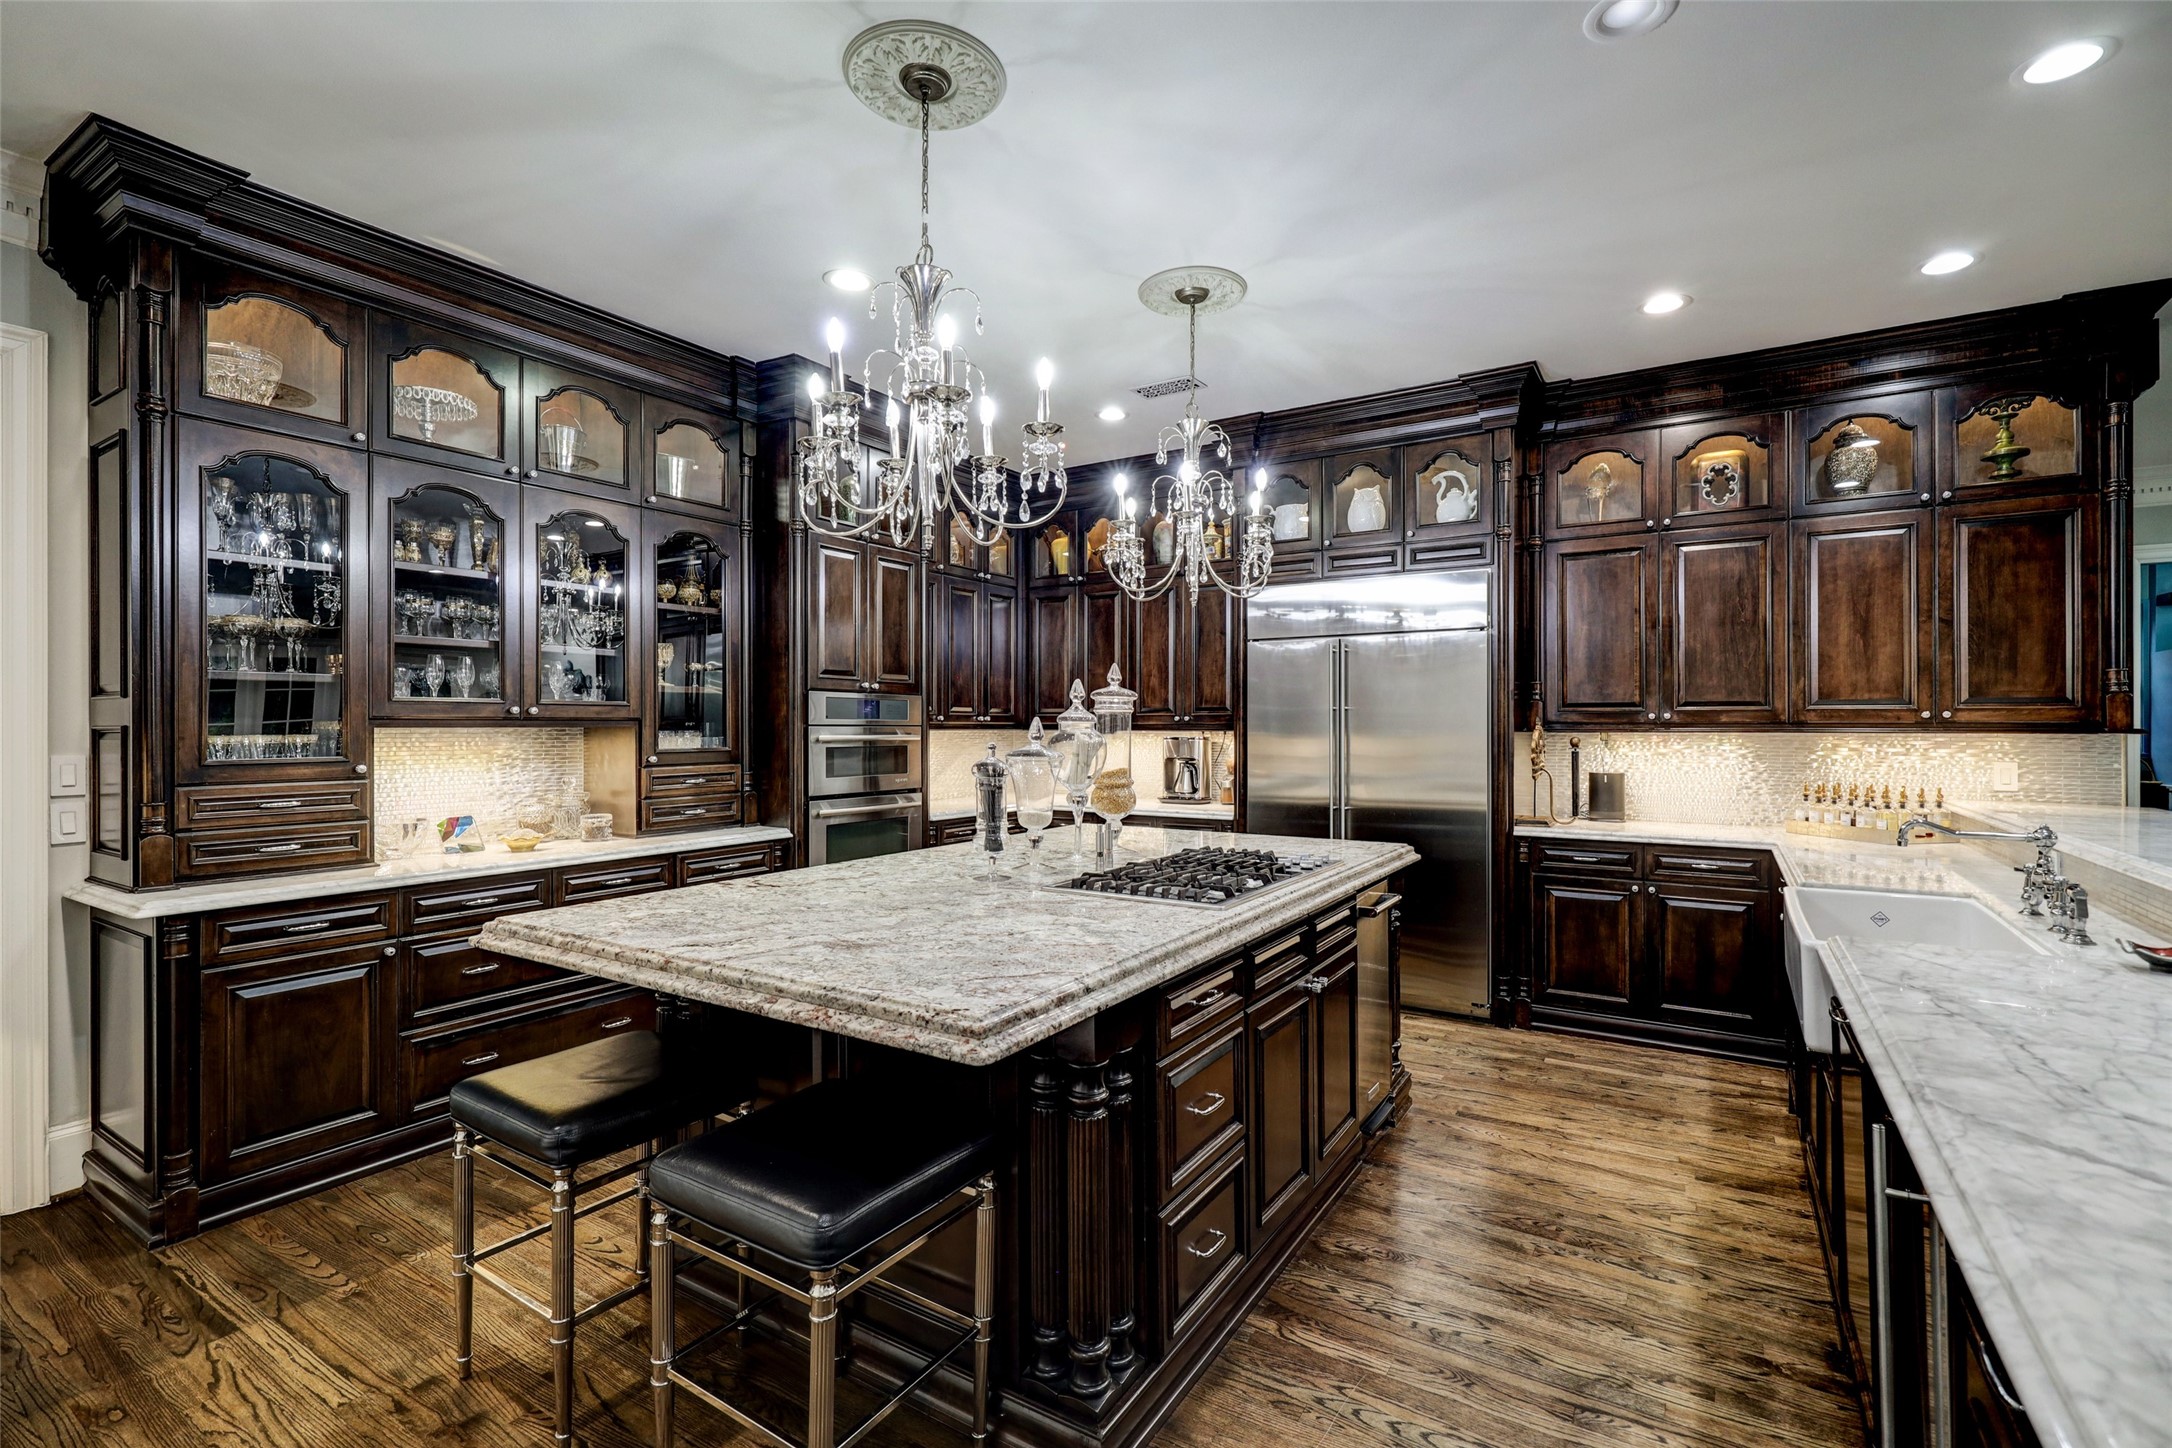 The Kitchen upper cabinets are lighted and feature glass paned doors so that you can display your treasures. Also within this space are a 'Sonic' ice machine, recent Monogram side-by-side Refrigerator, drawer-style Microwave, and updated cabinet lighting.